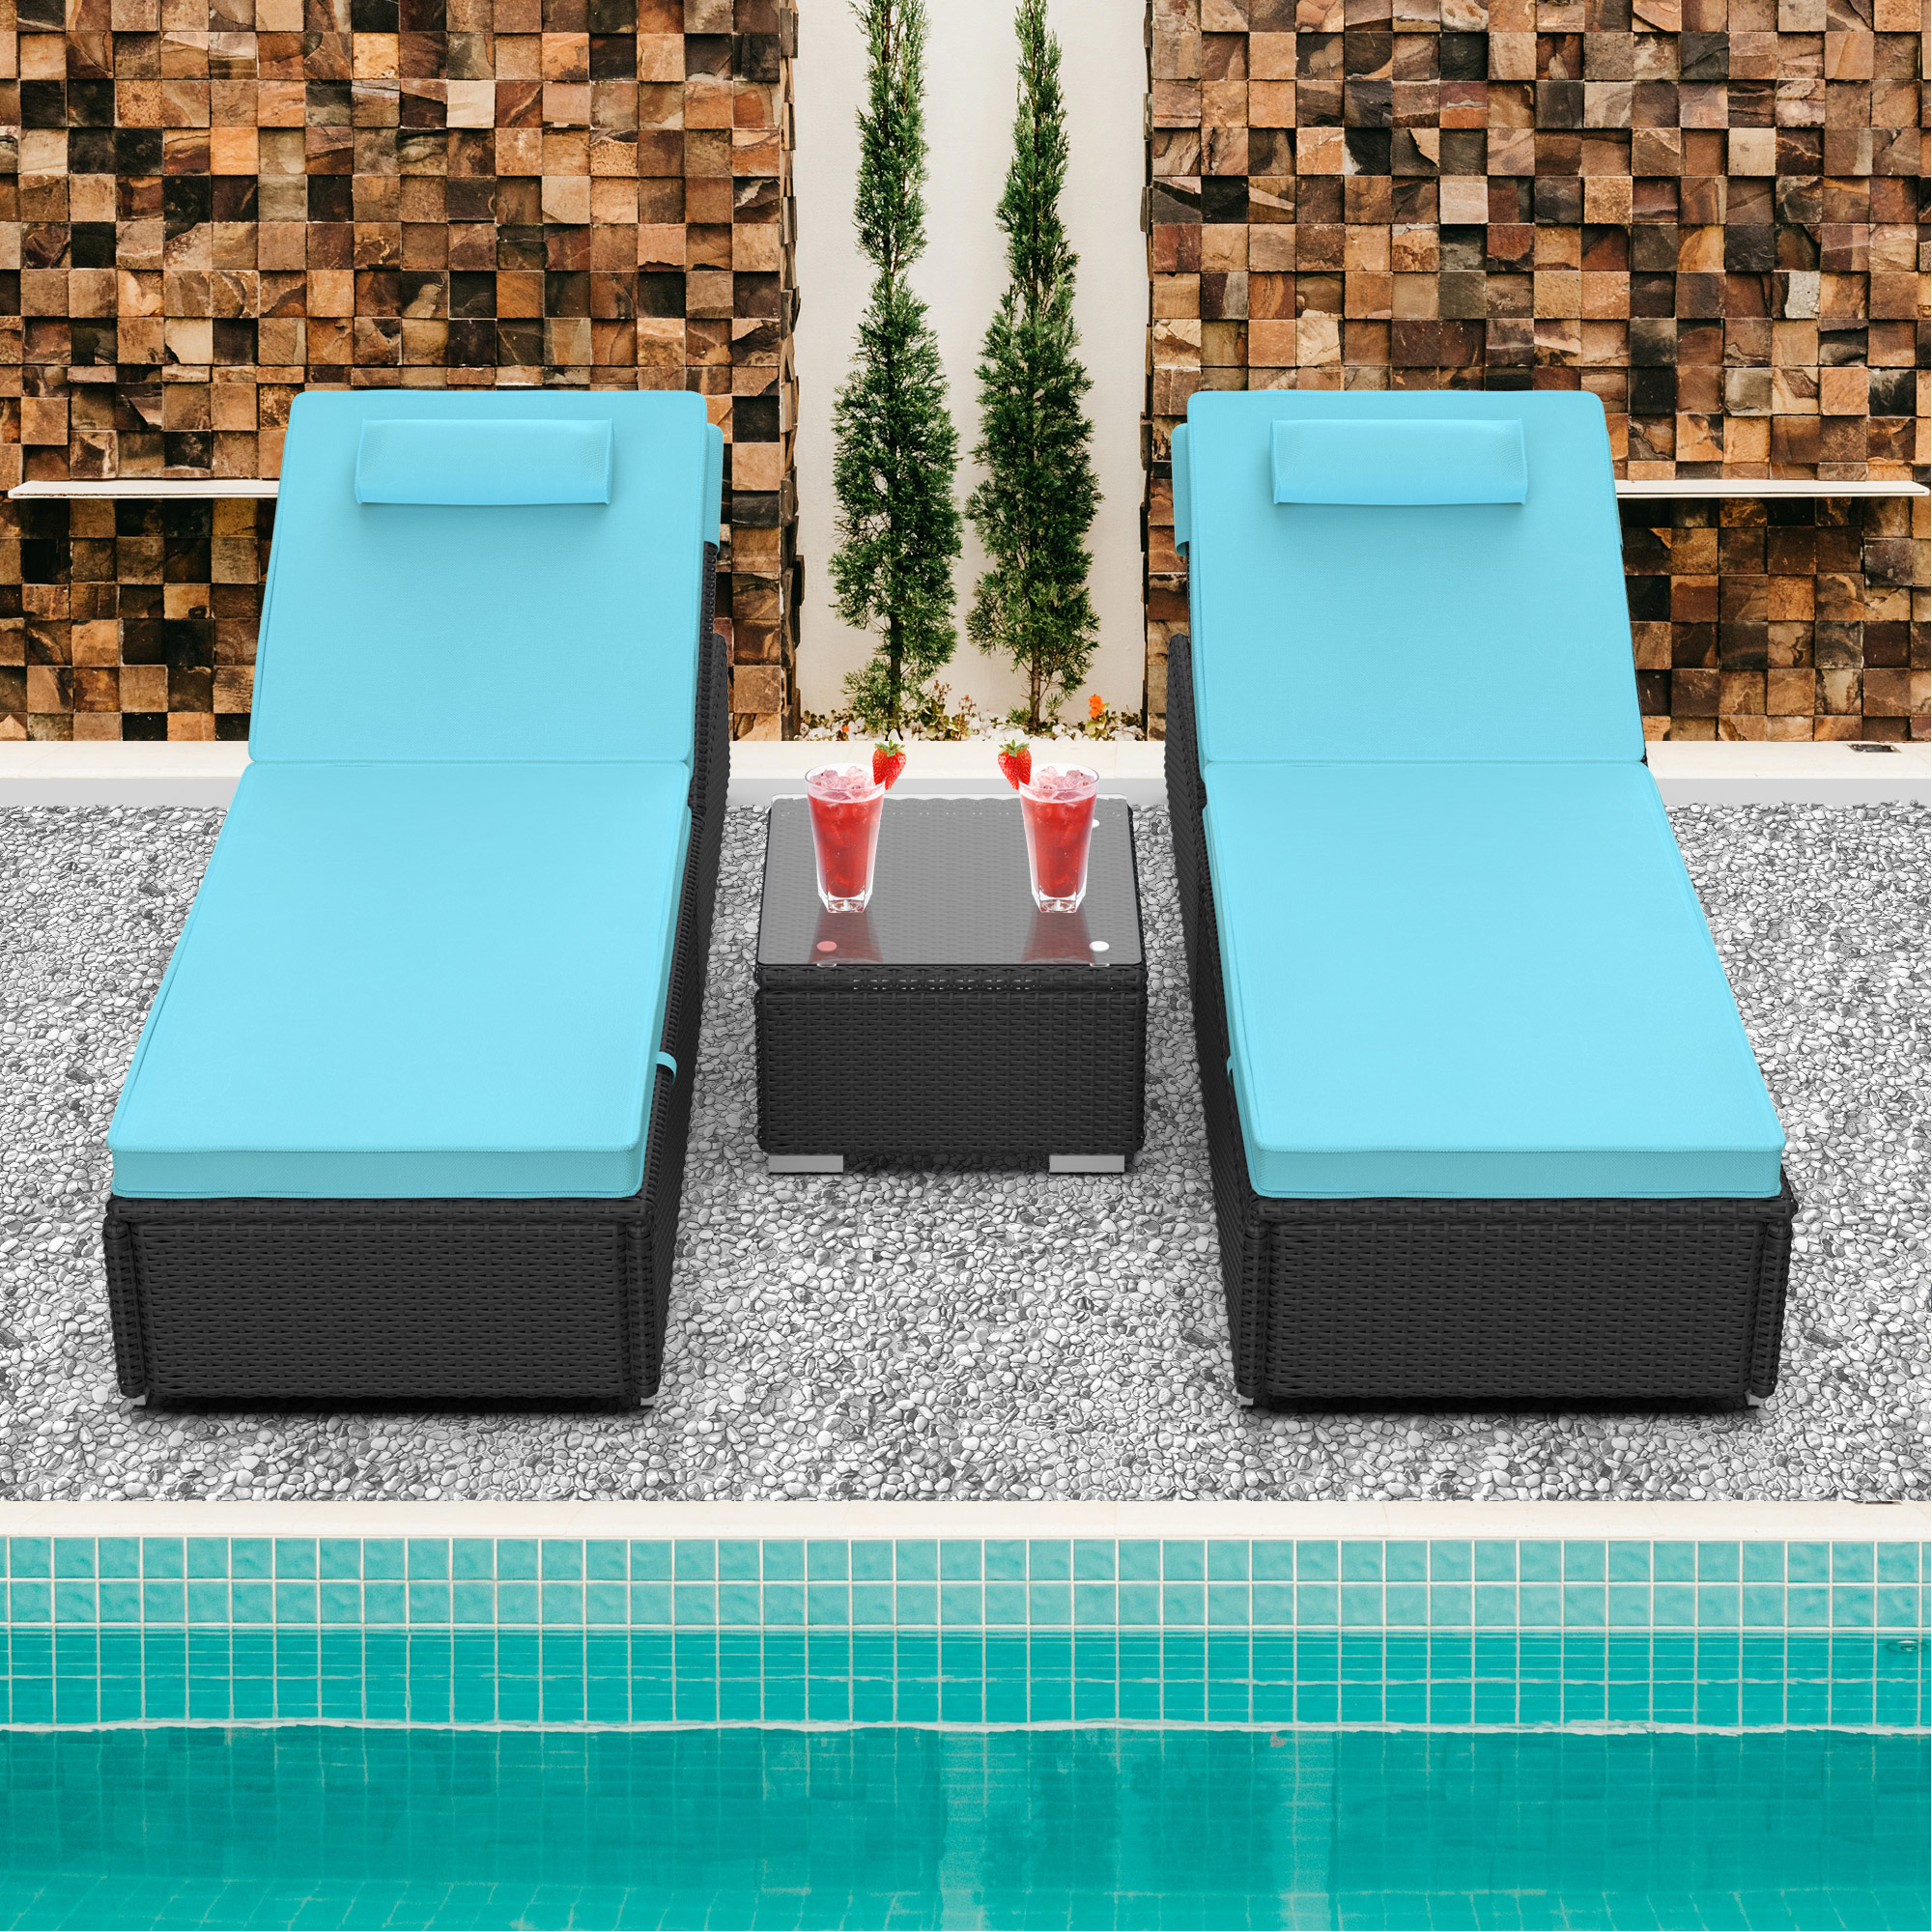 3 Pieces Wicker Chaise Lounge Furniture Set with Table & Cushions, SEGMART Outdoor Poolside Rattan Wicker Pool Chaise Lounge Chairs 2 Pillows for Backyard Deck Porch Garden, 330lbs, S1551 - image 3 of 12